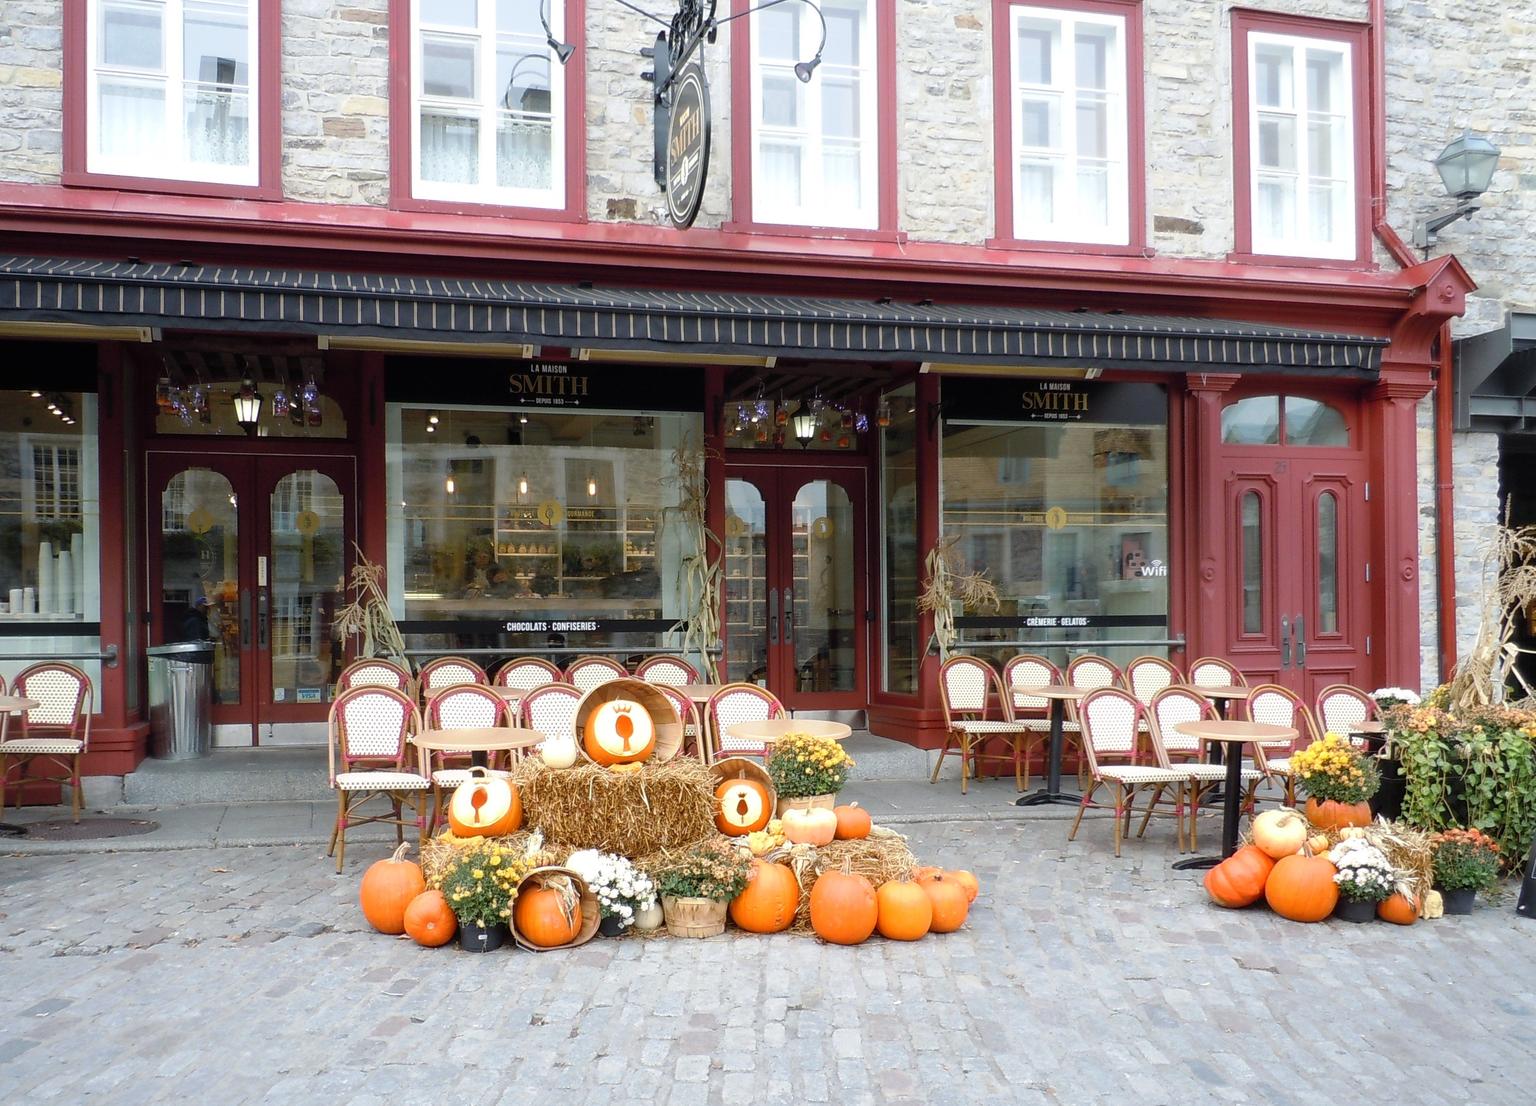 A shopkeeper in Petit Champlain welcomes fall visitors to his place.